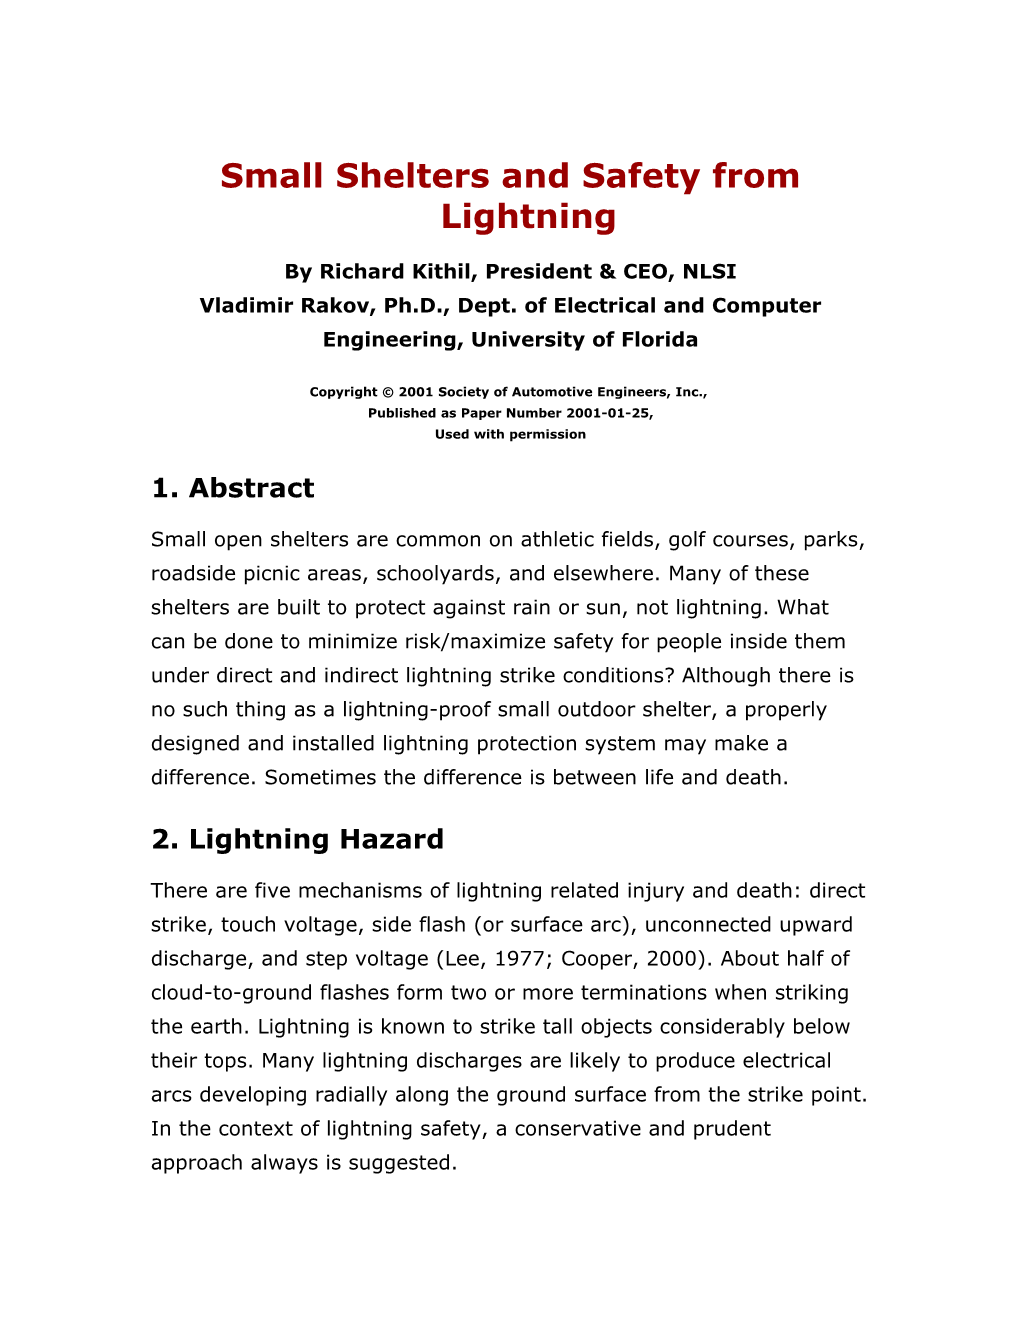 Small Shelters and Safety from Lightning